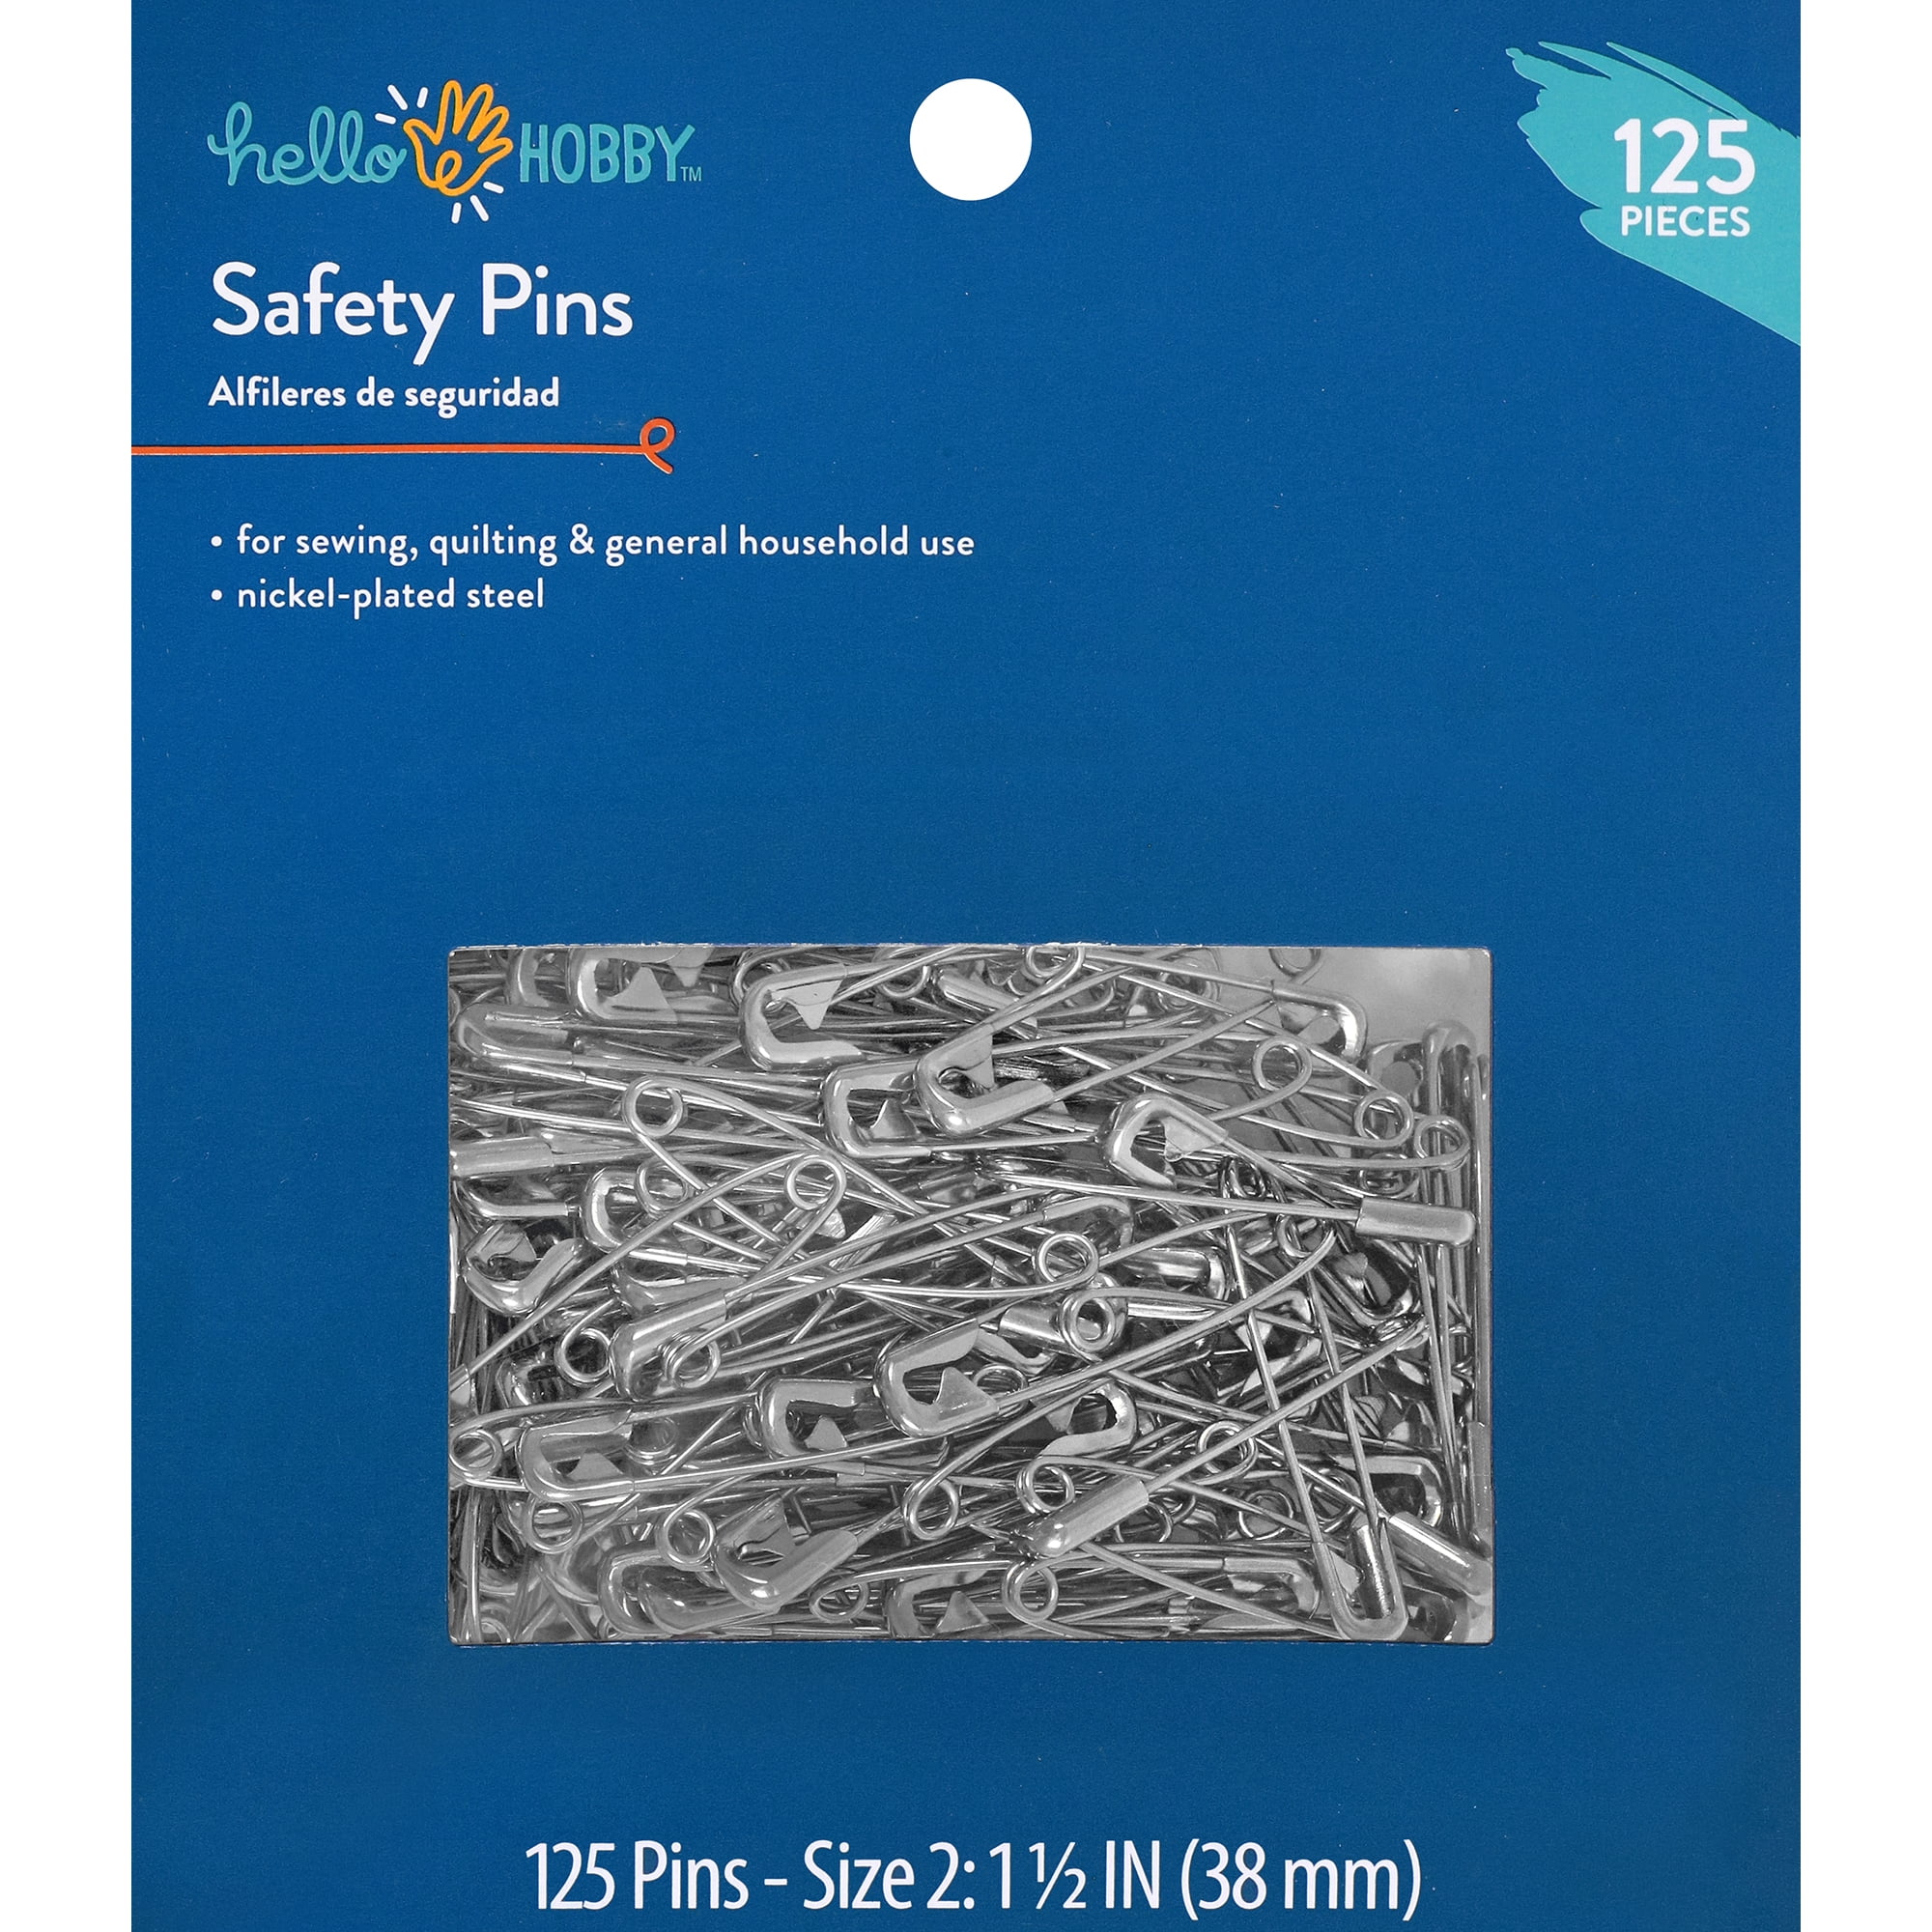 Silver Safety Pins - Small And Large size Coil-less Safety Pins - Pack of 40